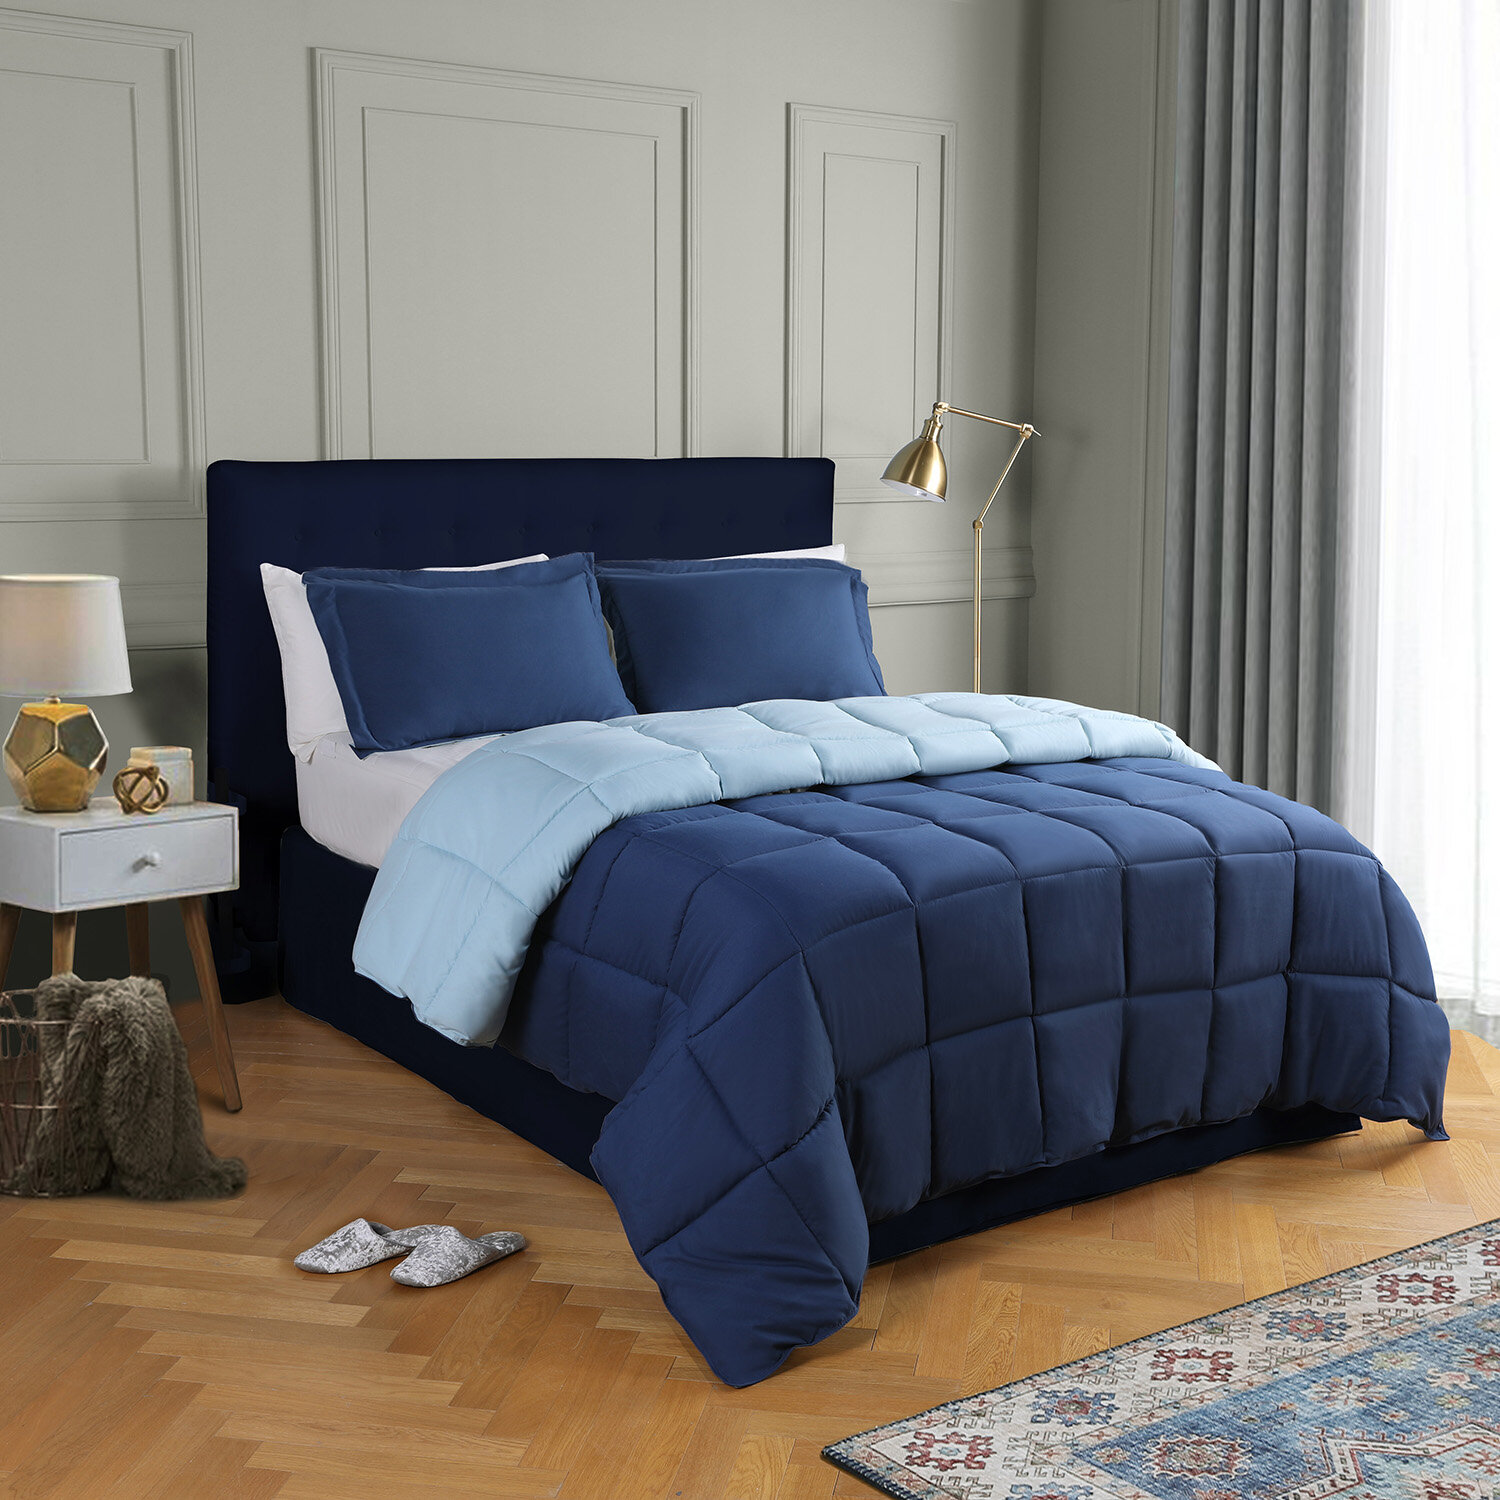 King Size Navy Comforters Sets Free Shipping Over 35 Wayfair